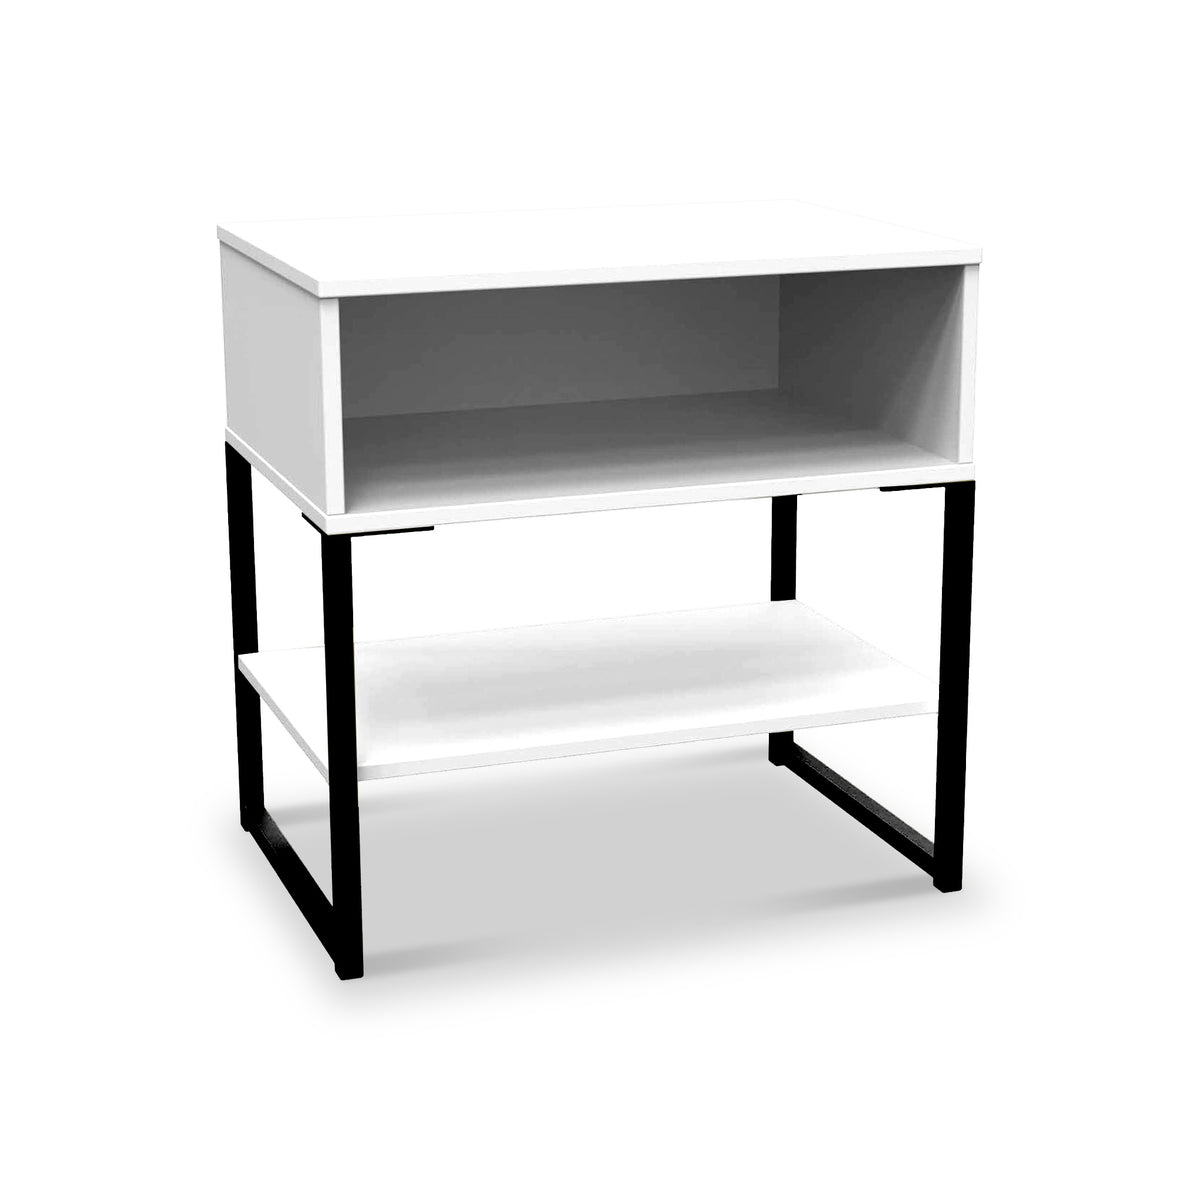 Hudson White Open Drawer Bedside with Lower Shelf from Roseland Furniture